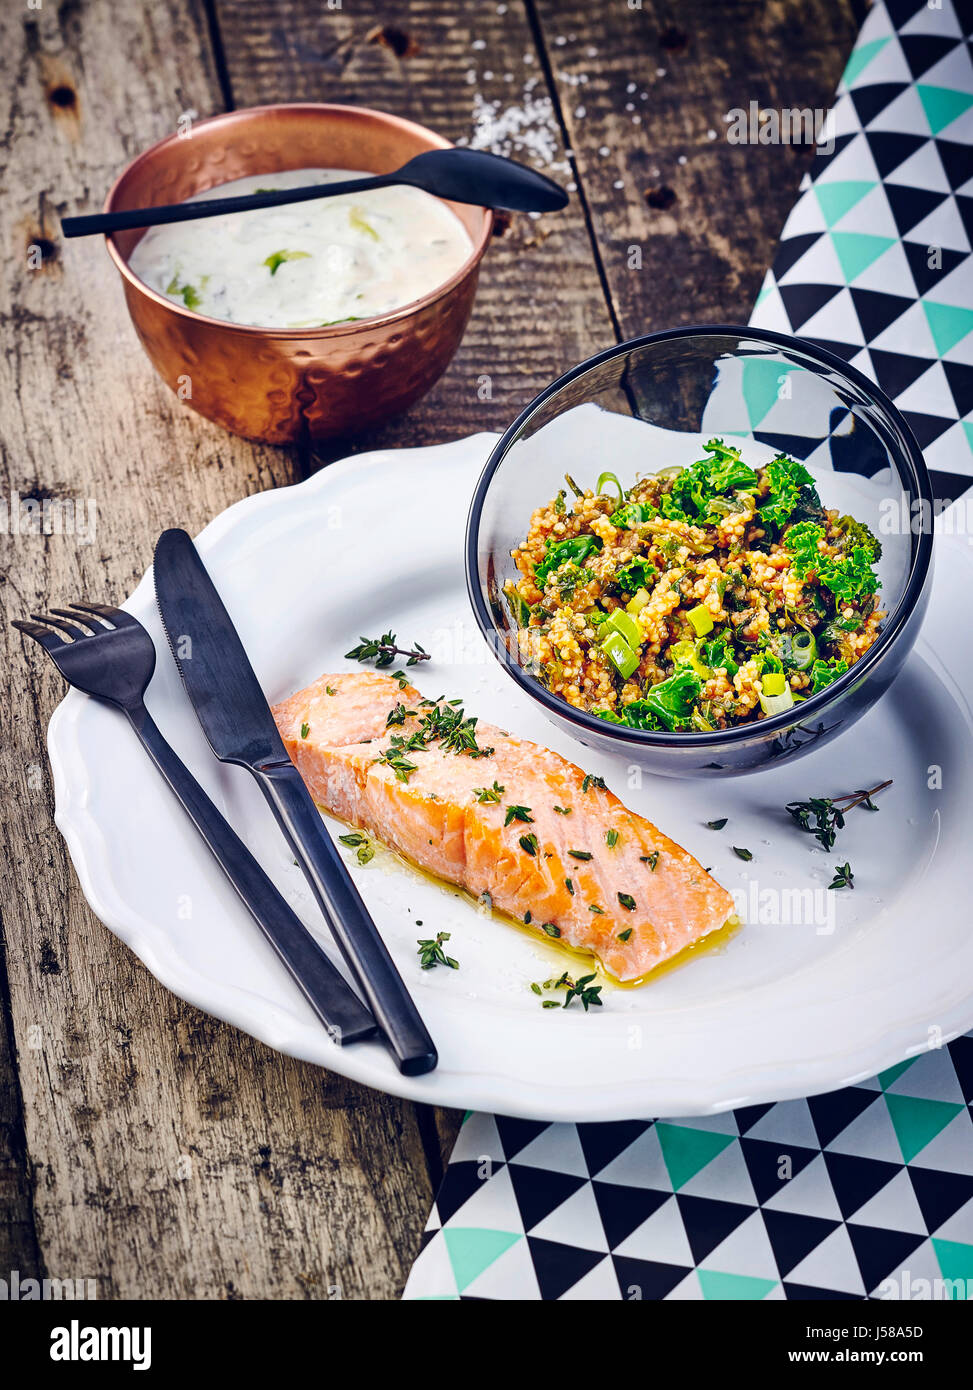 Baked salmon with yoghurt dip and millet salad with kale Stock Photo